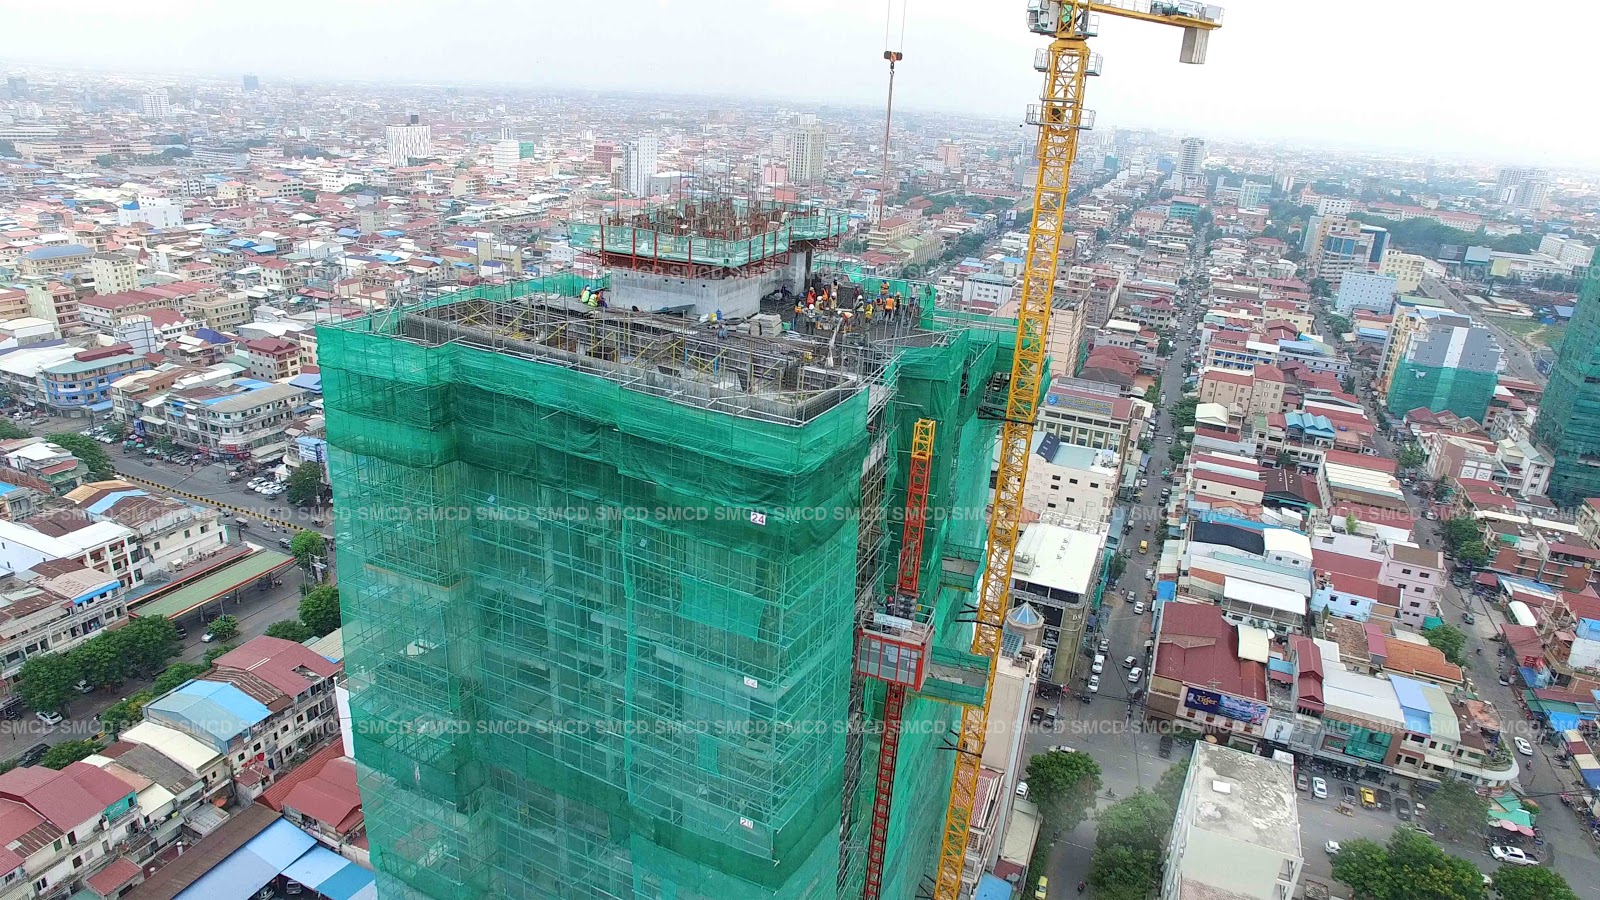 SOMA Construction & Development: Fast builder of quality high-rises